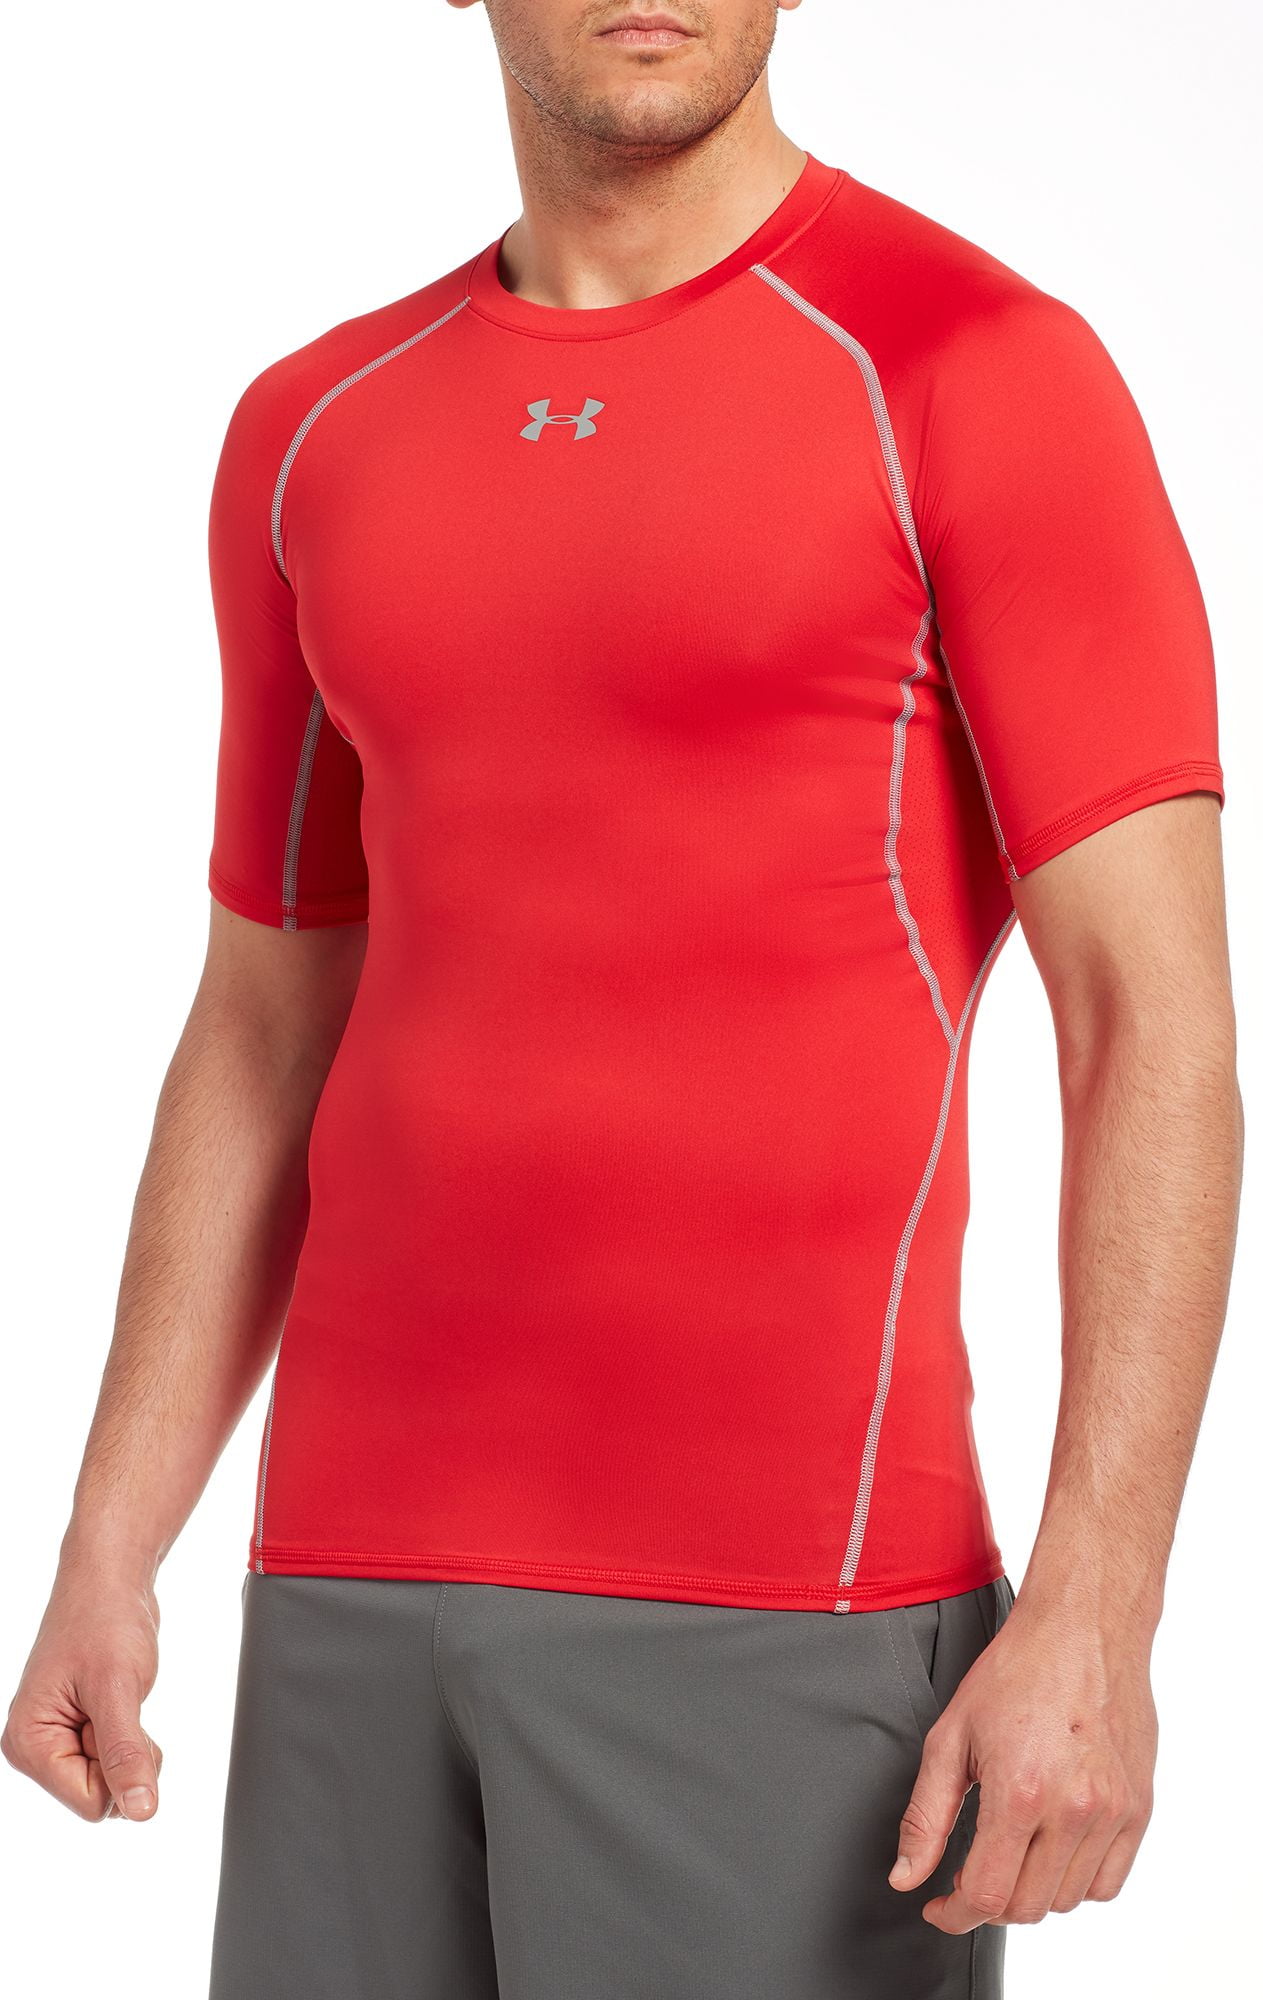 Under Armour - under armour 1257468 men's red heatgear s/s compression ...